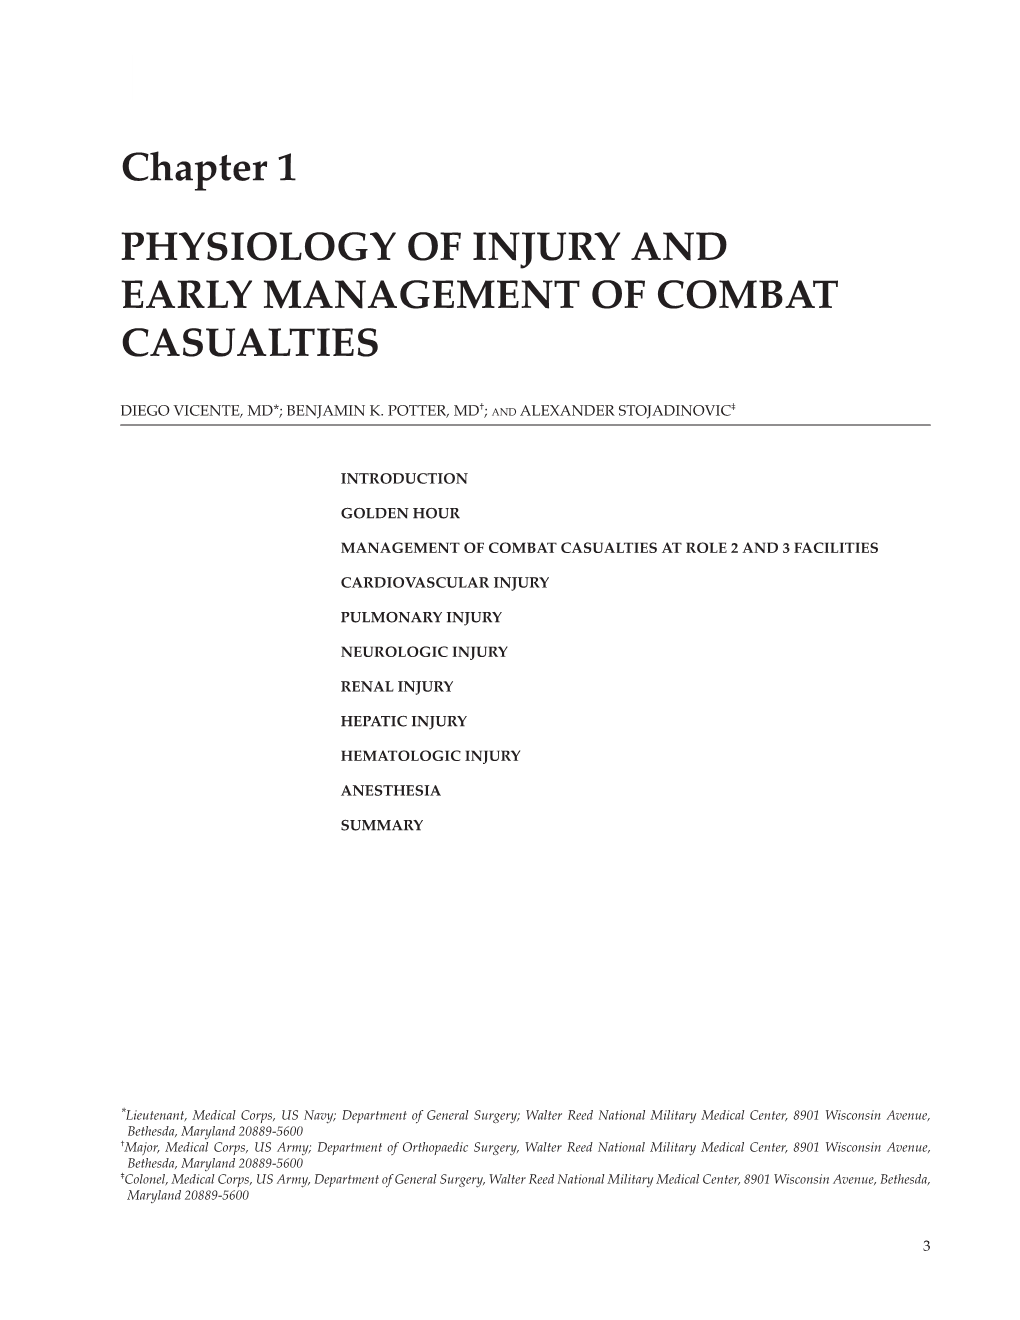 Chapter 1 Physiology of Injury and Early Management of Combat Casualties